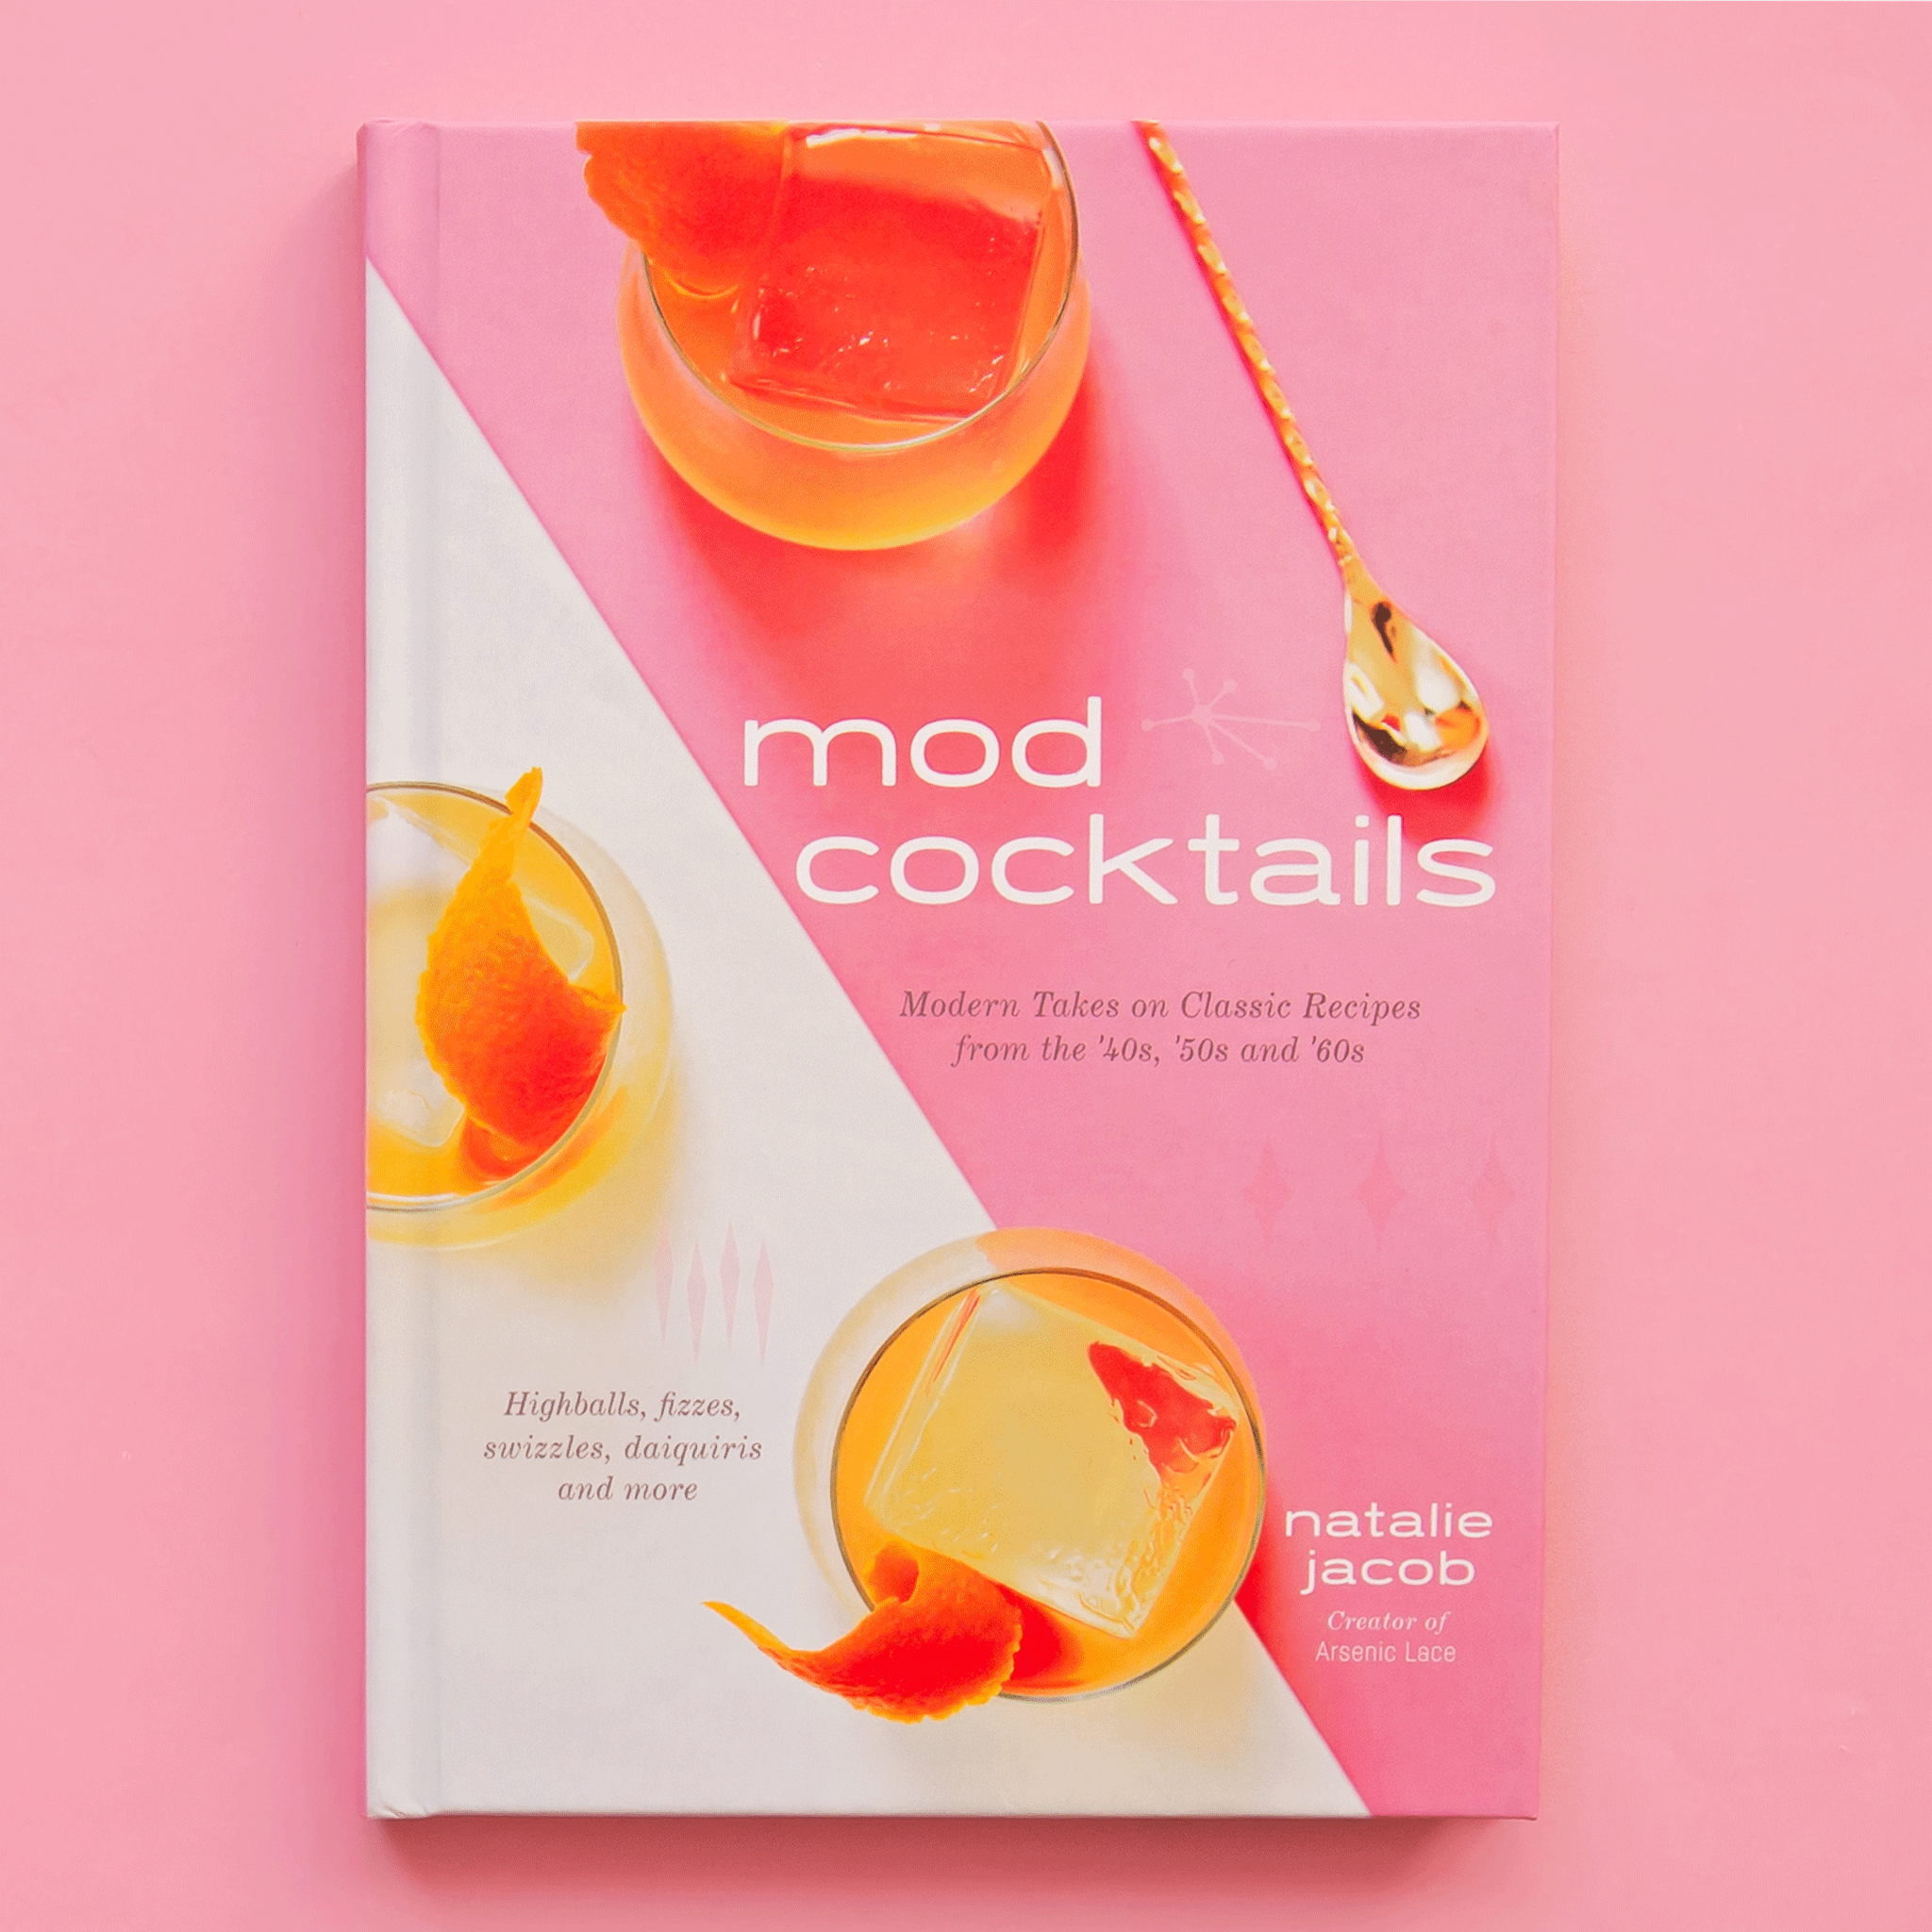 On a pink background is a pink bar book with cocktail glasses on the front cover and a title that reads, &quot;mod cocktails Modern Takes on Classic Recipes from the &#39;40s, &#39;50s and &#39;60s&quot;.